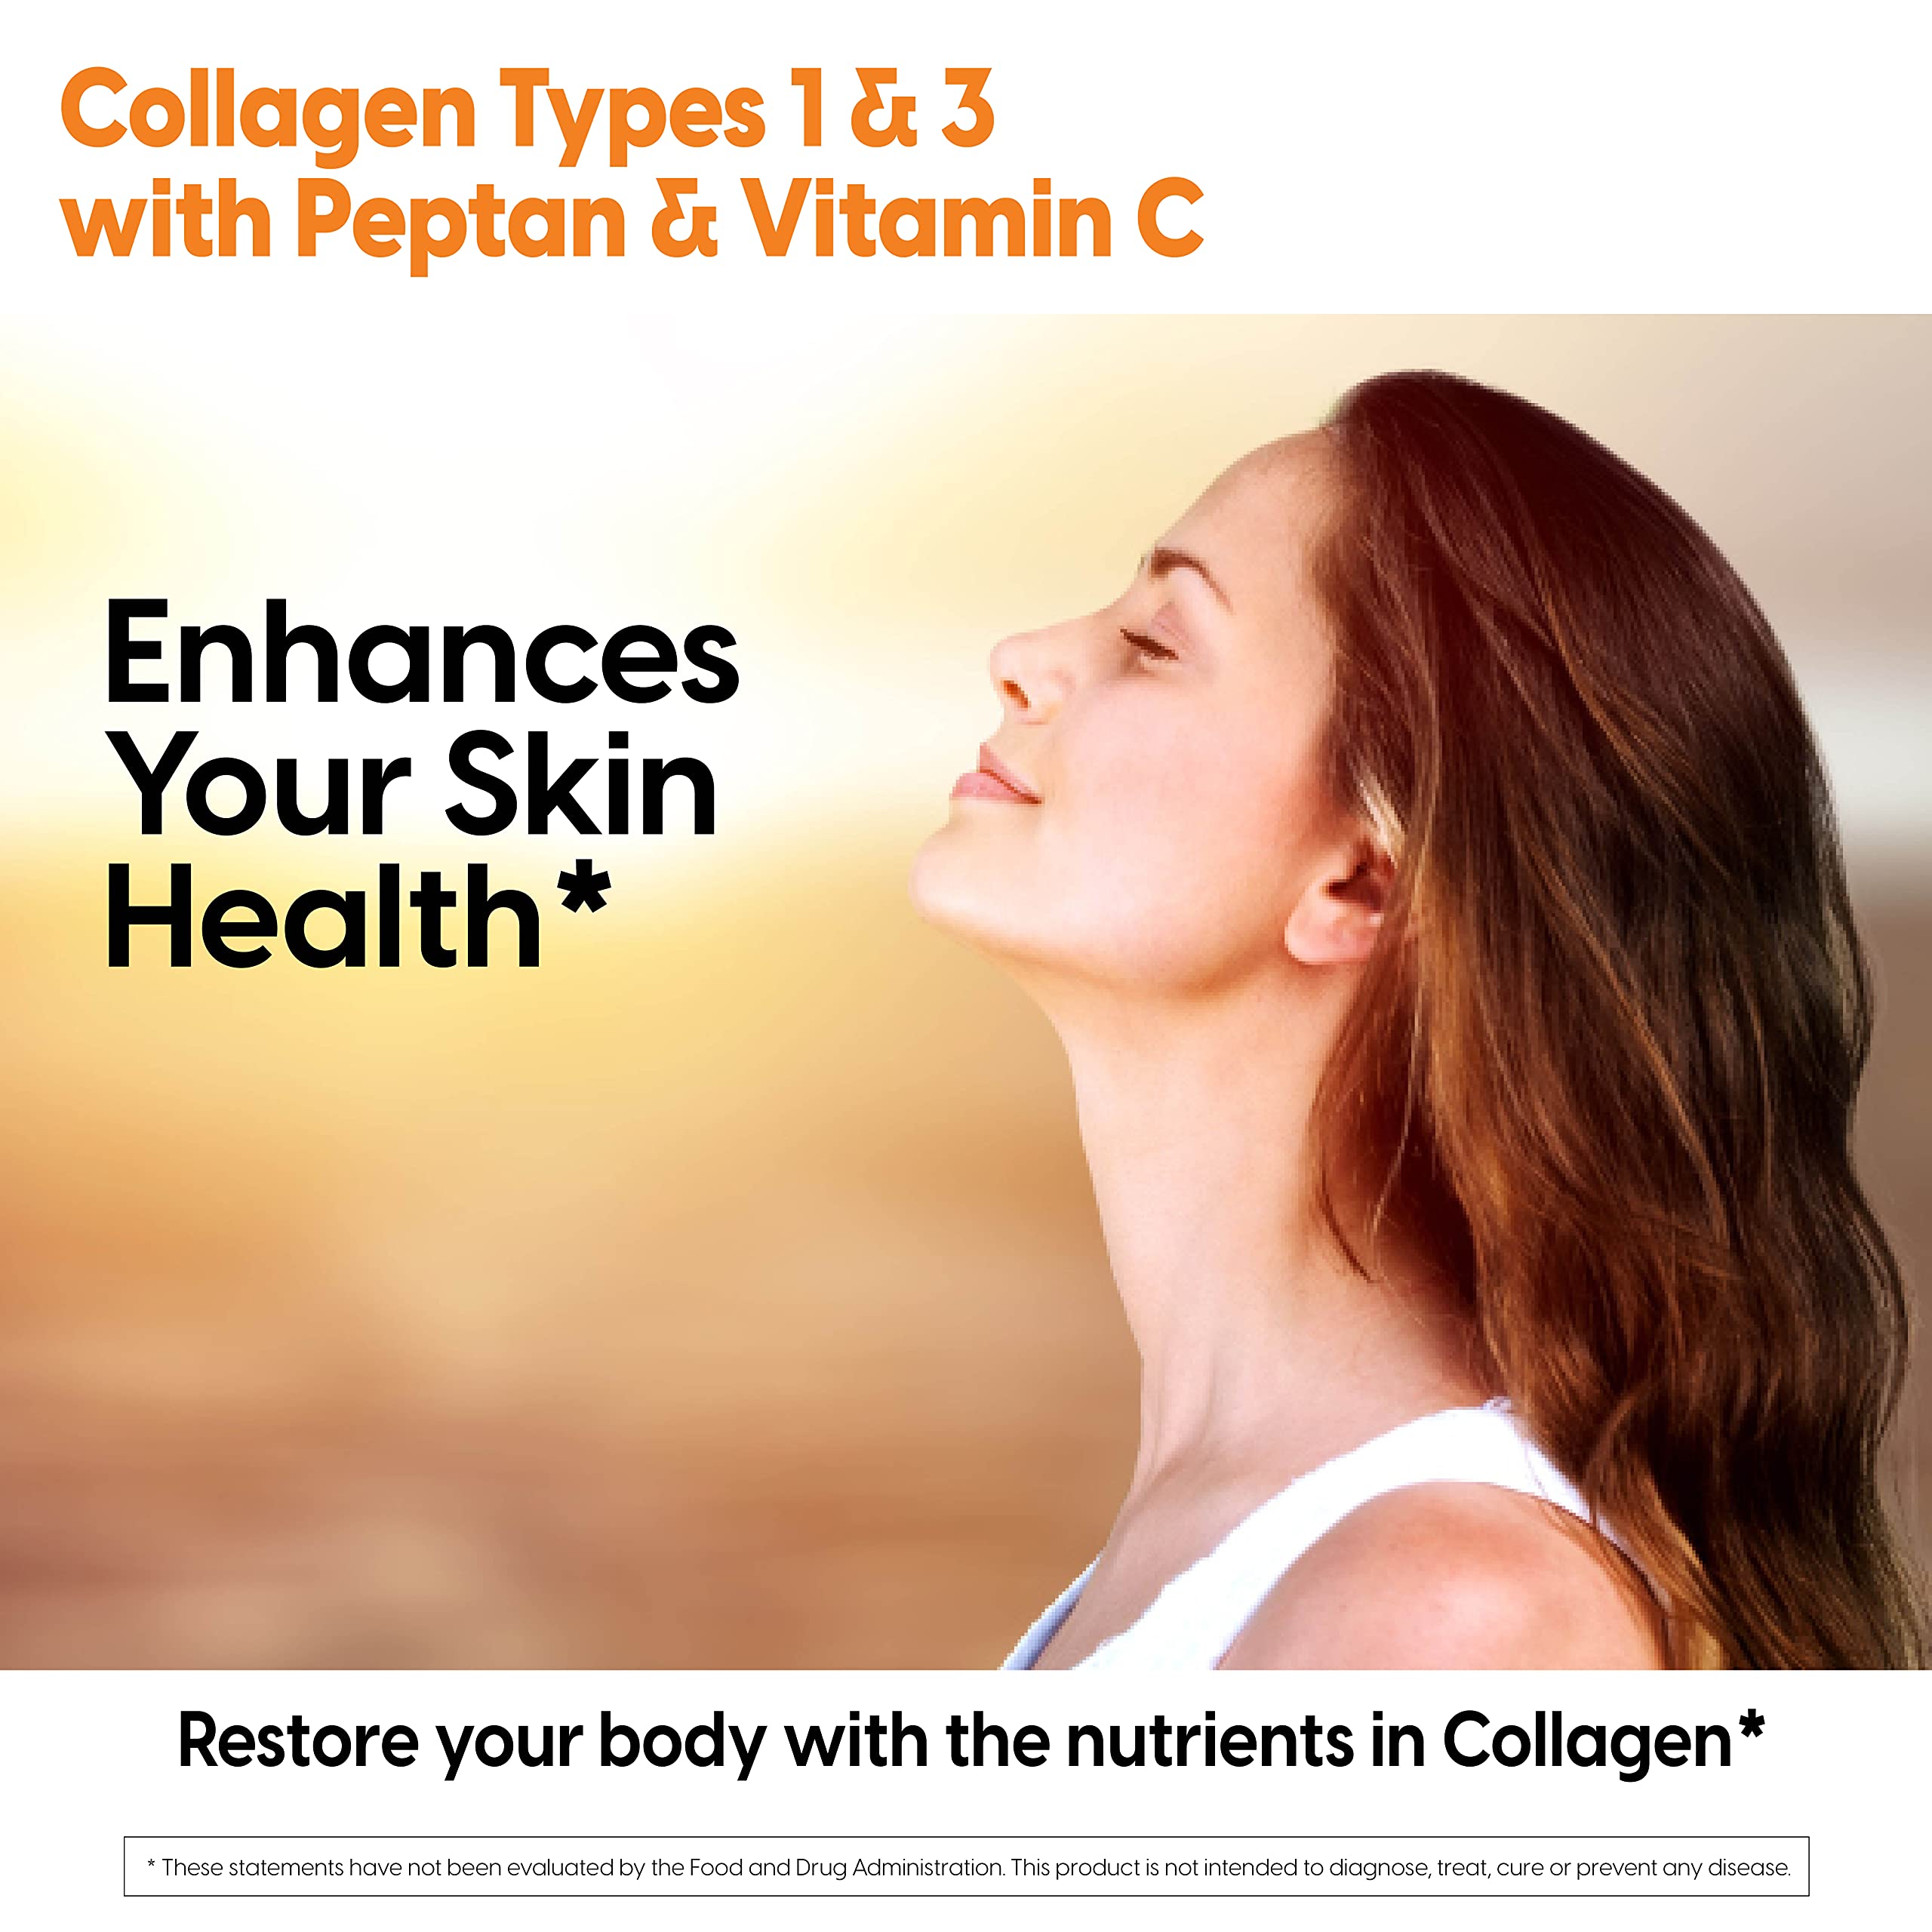 Doctor's Best Collagen Types 1 & 3 with Vitamin C, Non-GMO, Gluten Free, Soy Free, Supports Hair, Skin, Nails, Tendons & Bones, 500 mg, 240 Caps (DRB-00263)